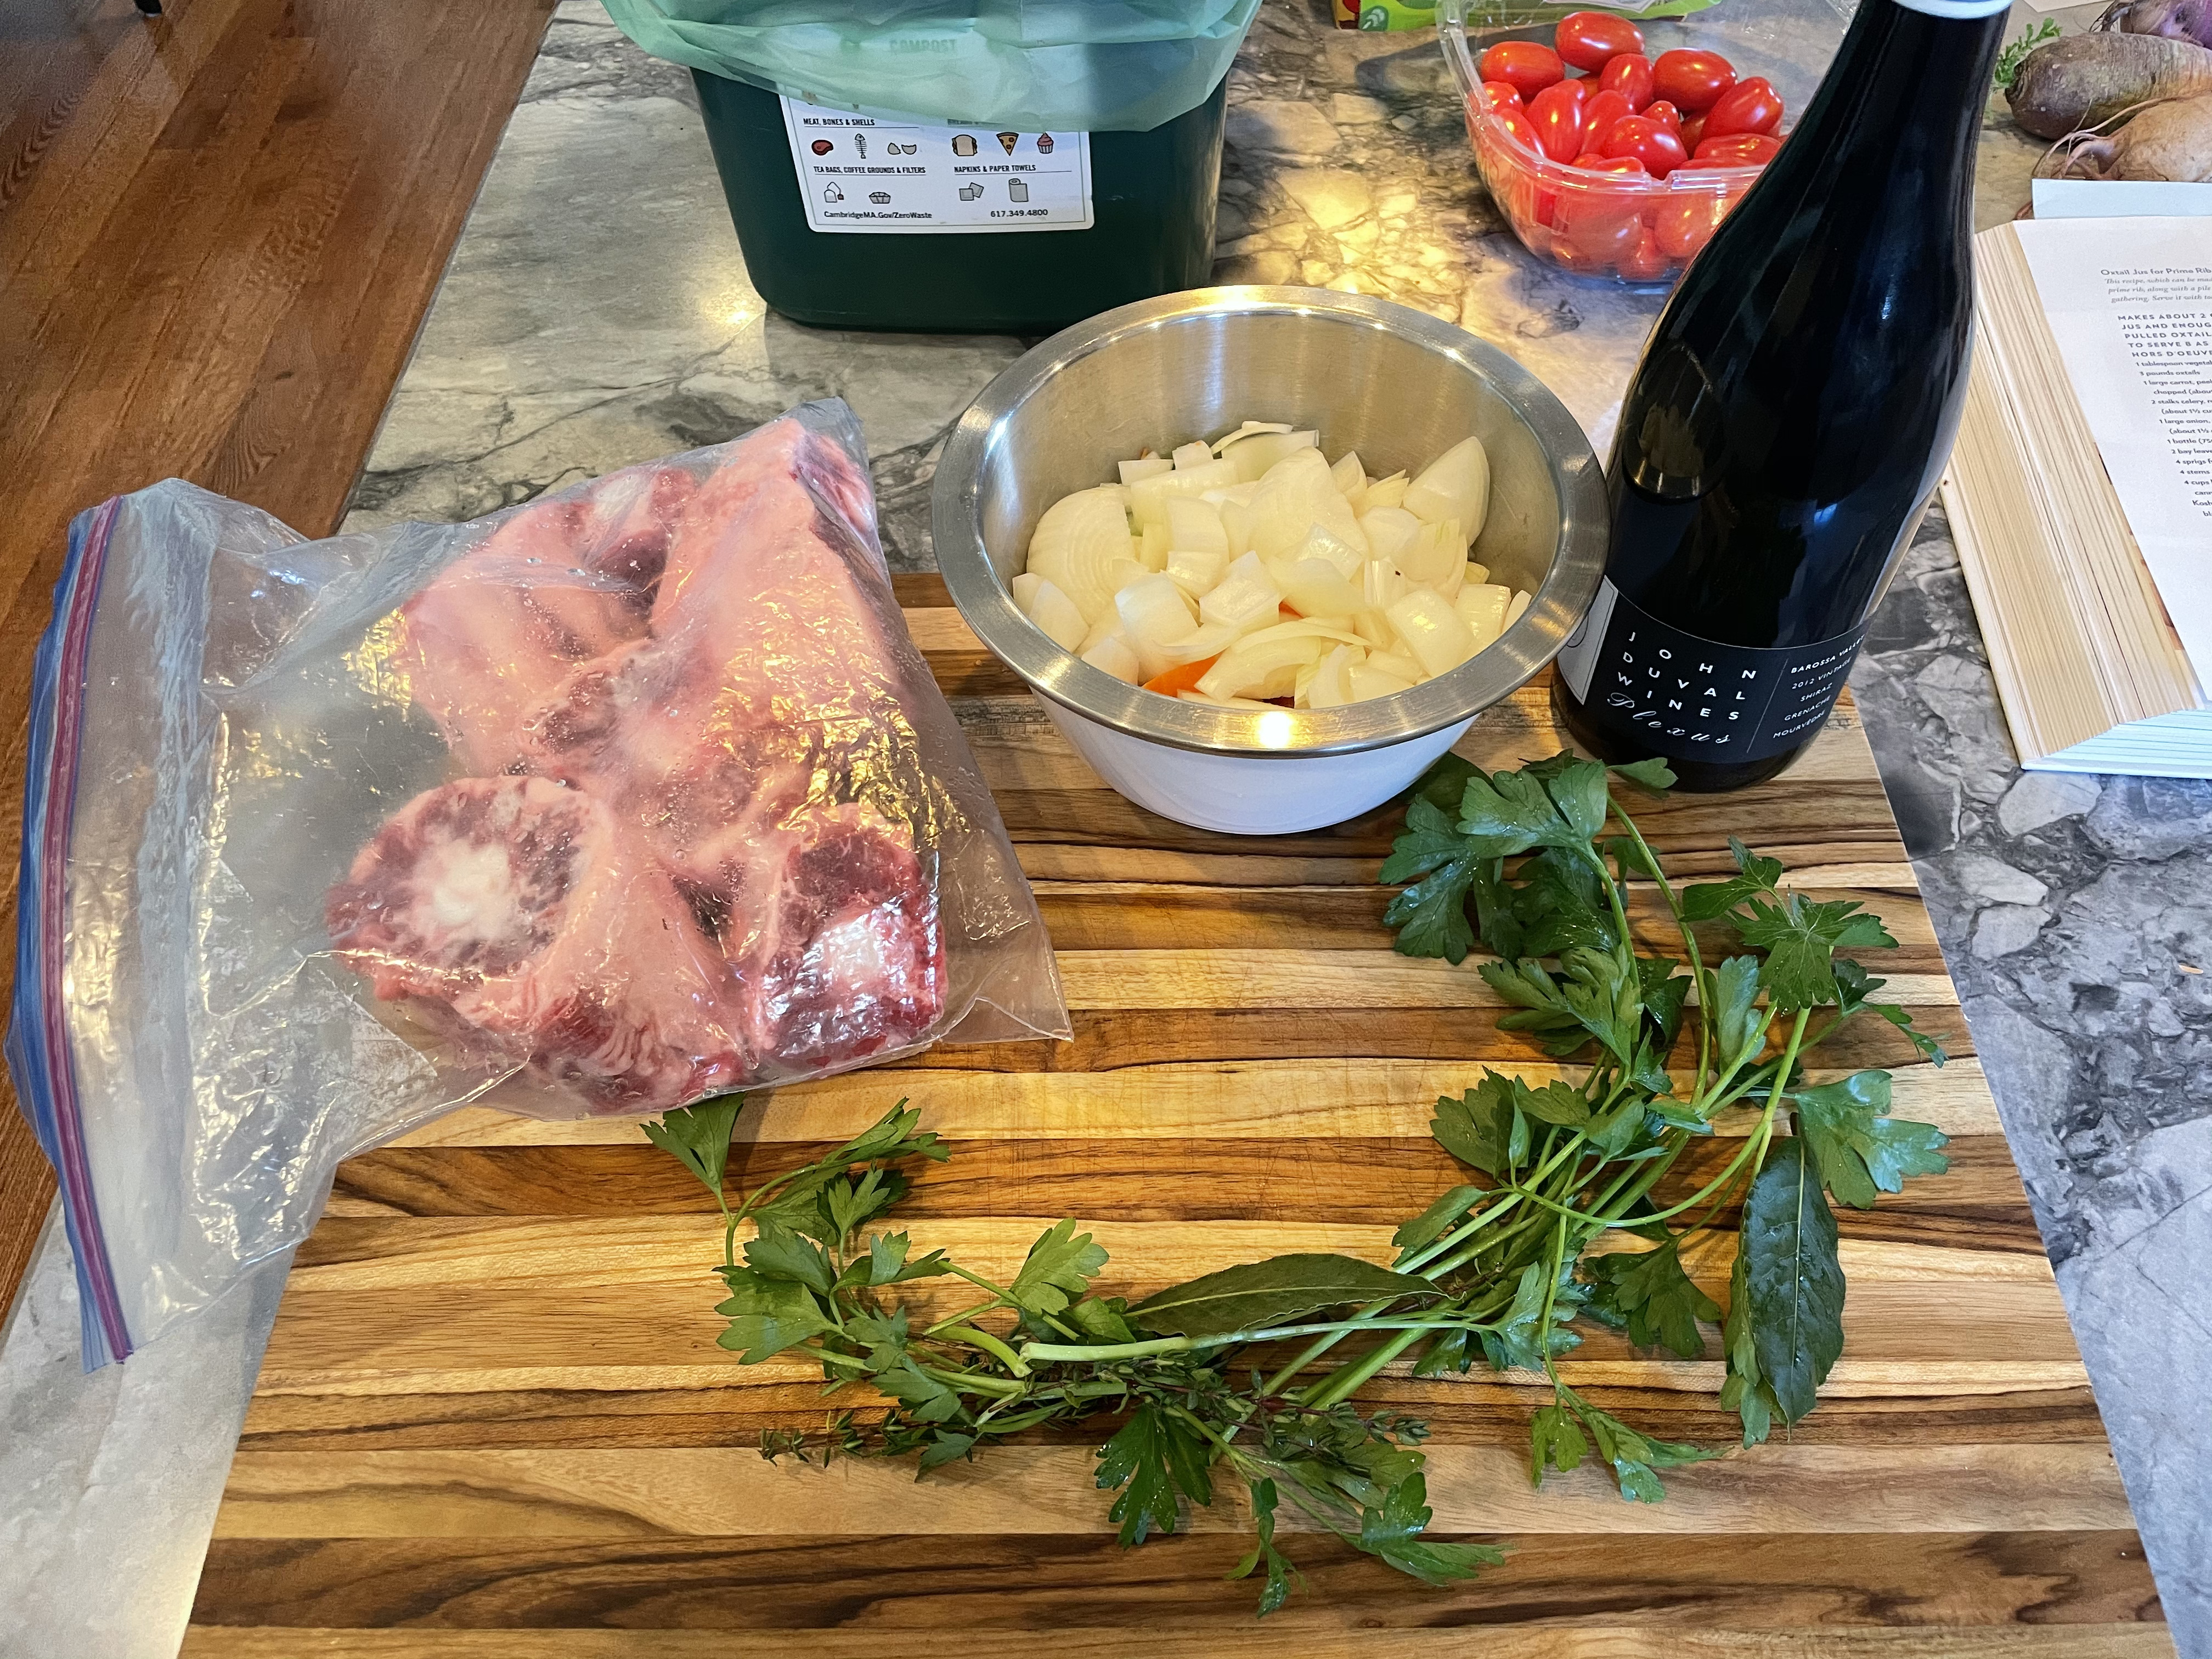 Ingredients for Oxtail Au Jus